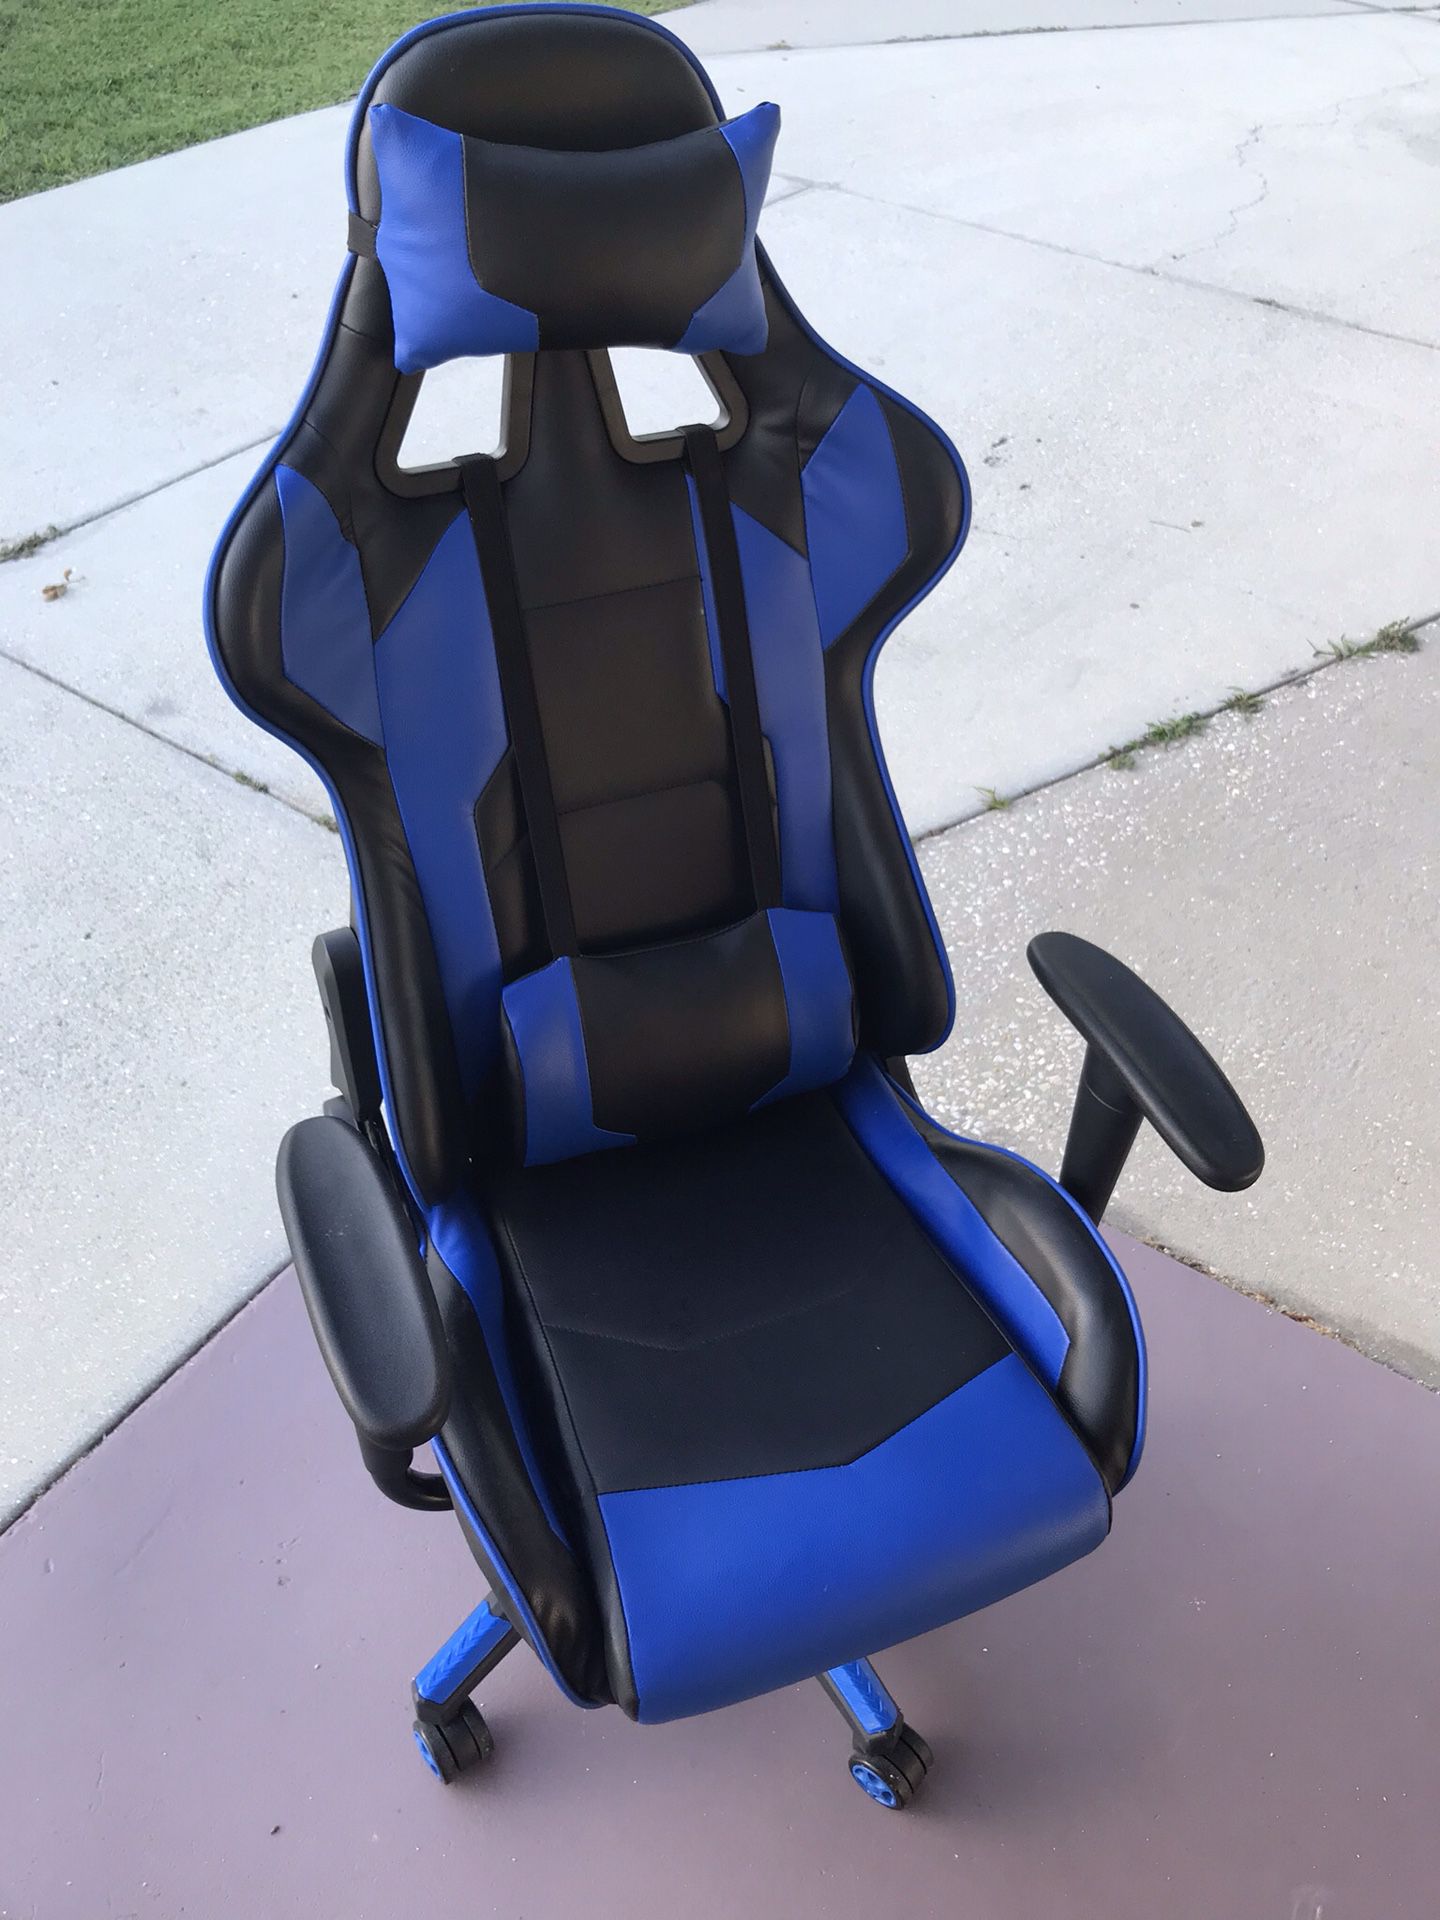 New Gaming Chair Reclines